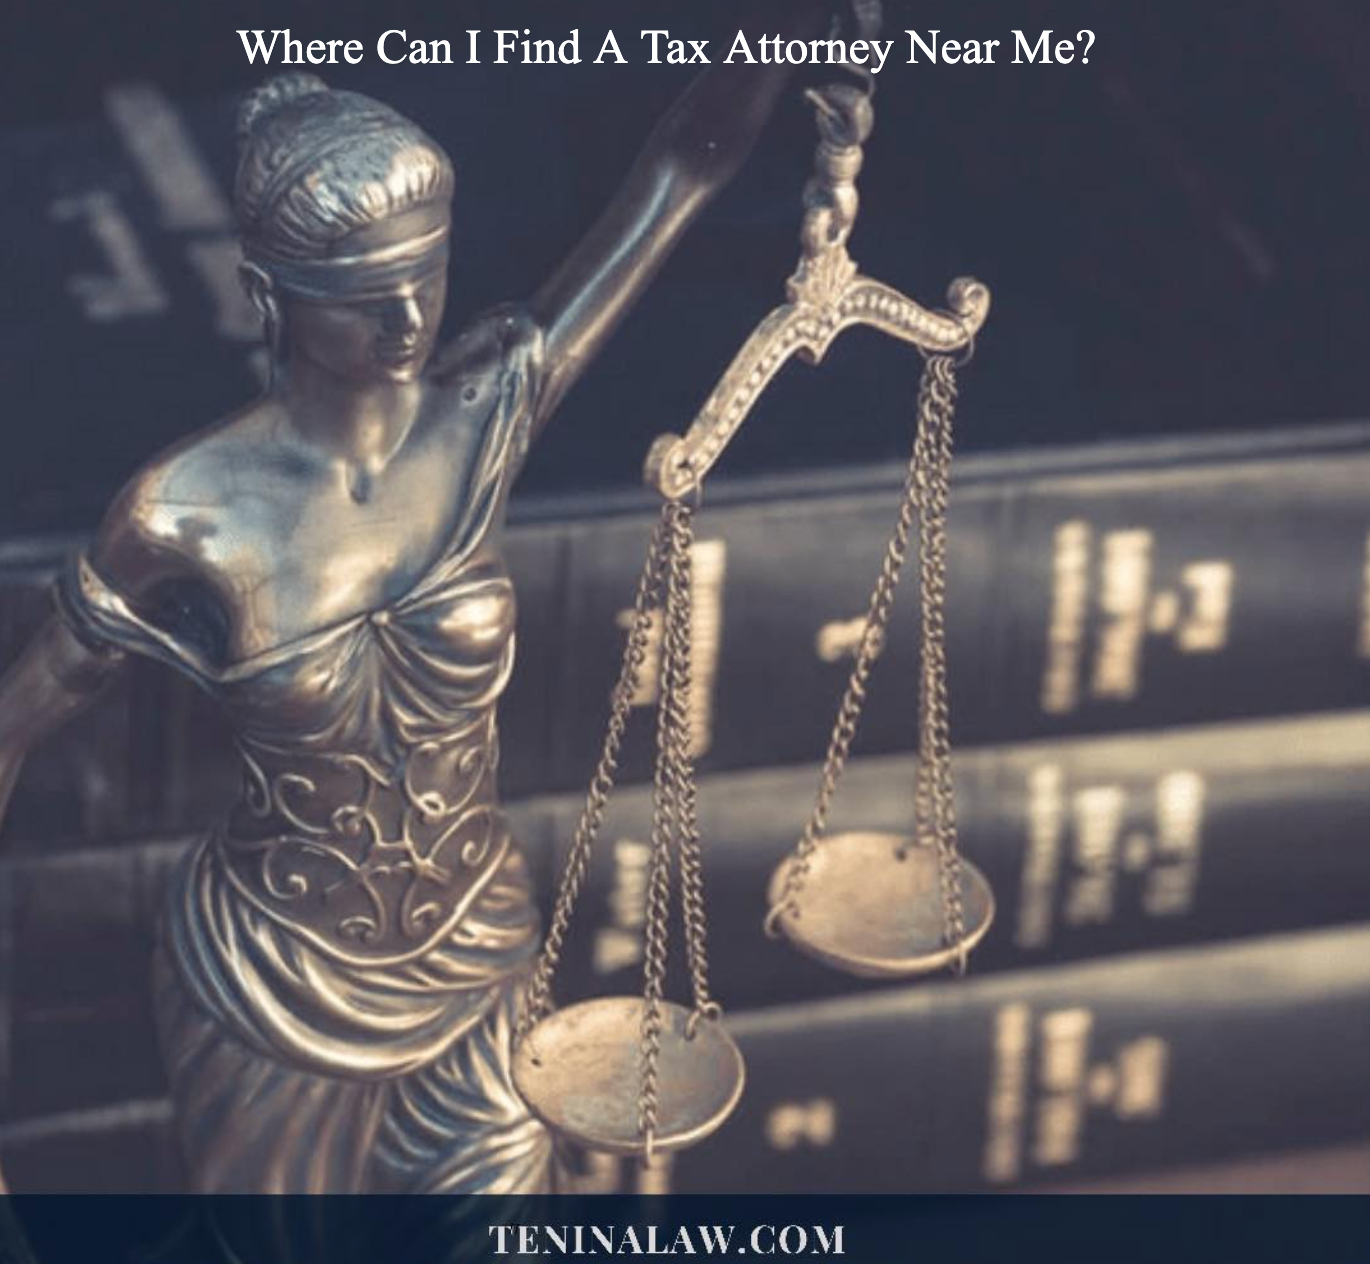 Where Can I Find A Tax Attorney Near Me?